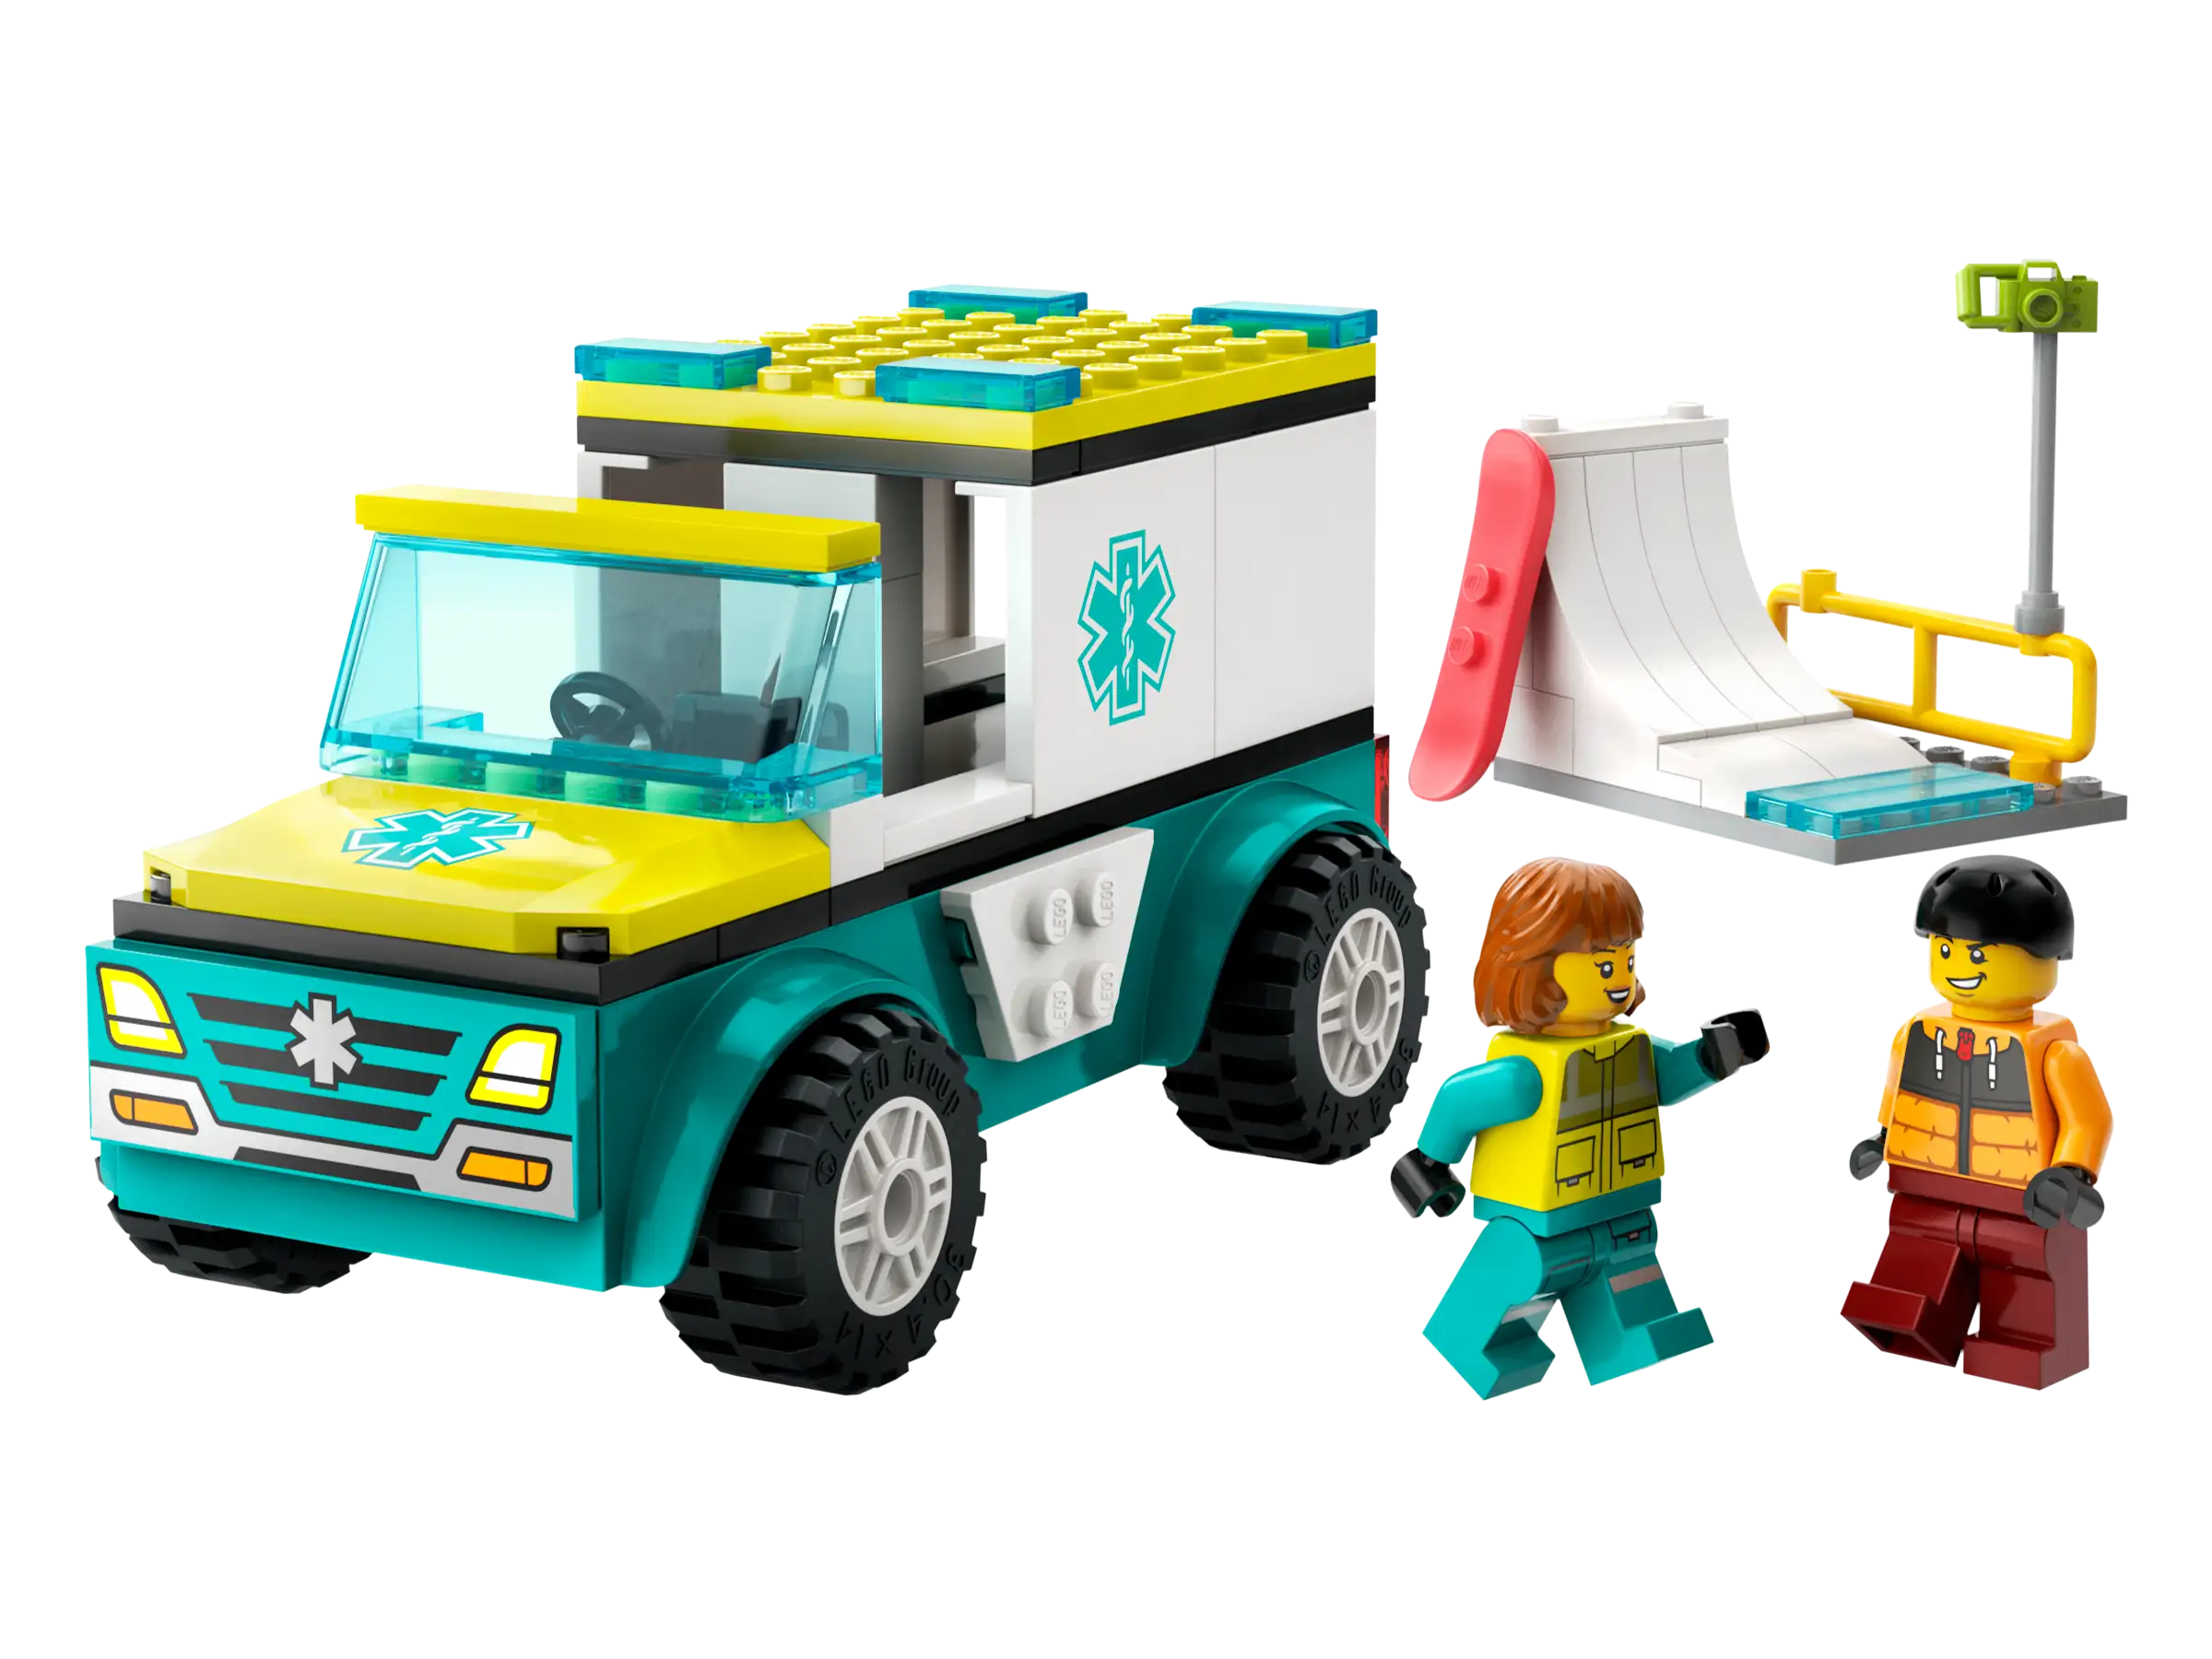 Lego - The emergency ambulance and the snowboarder